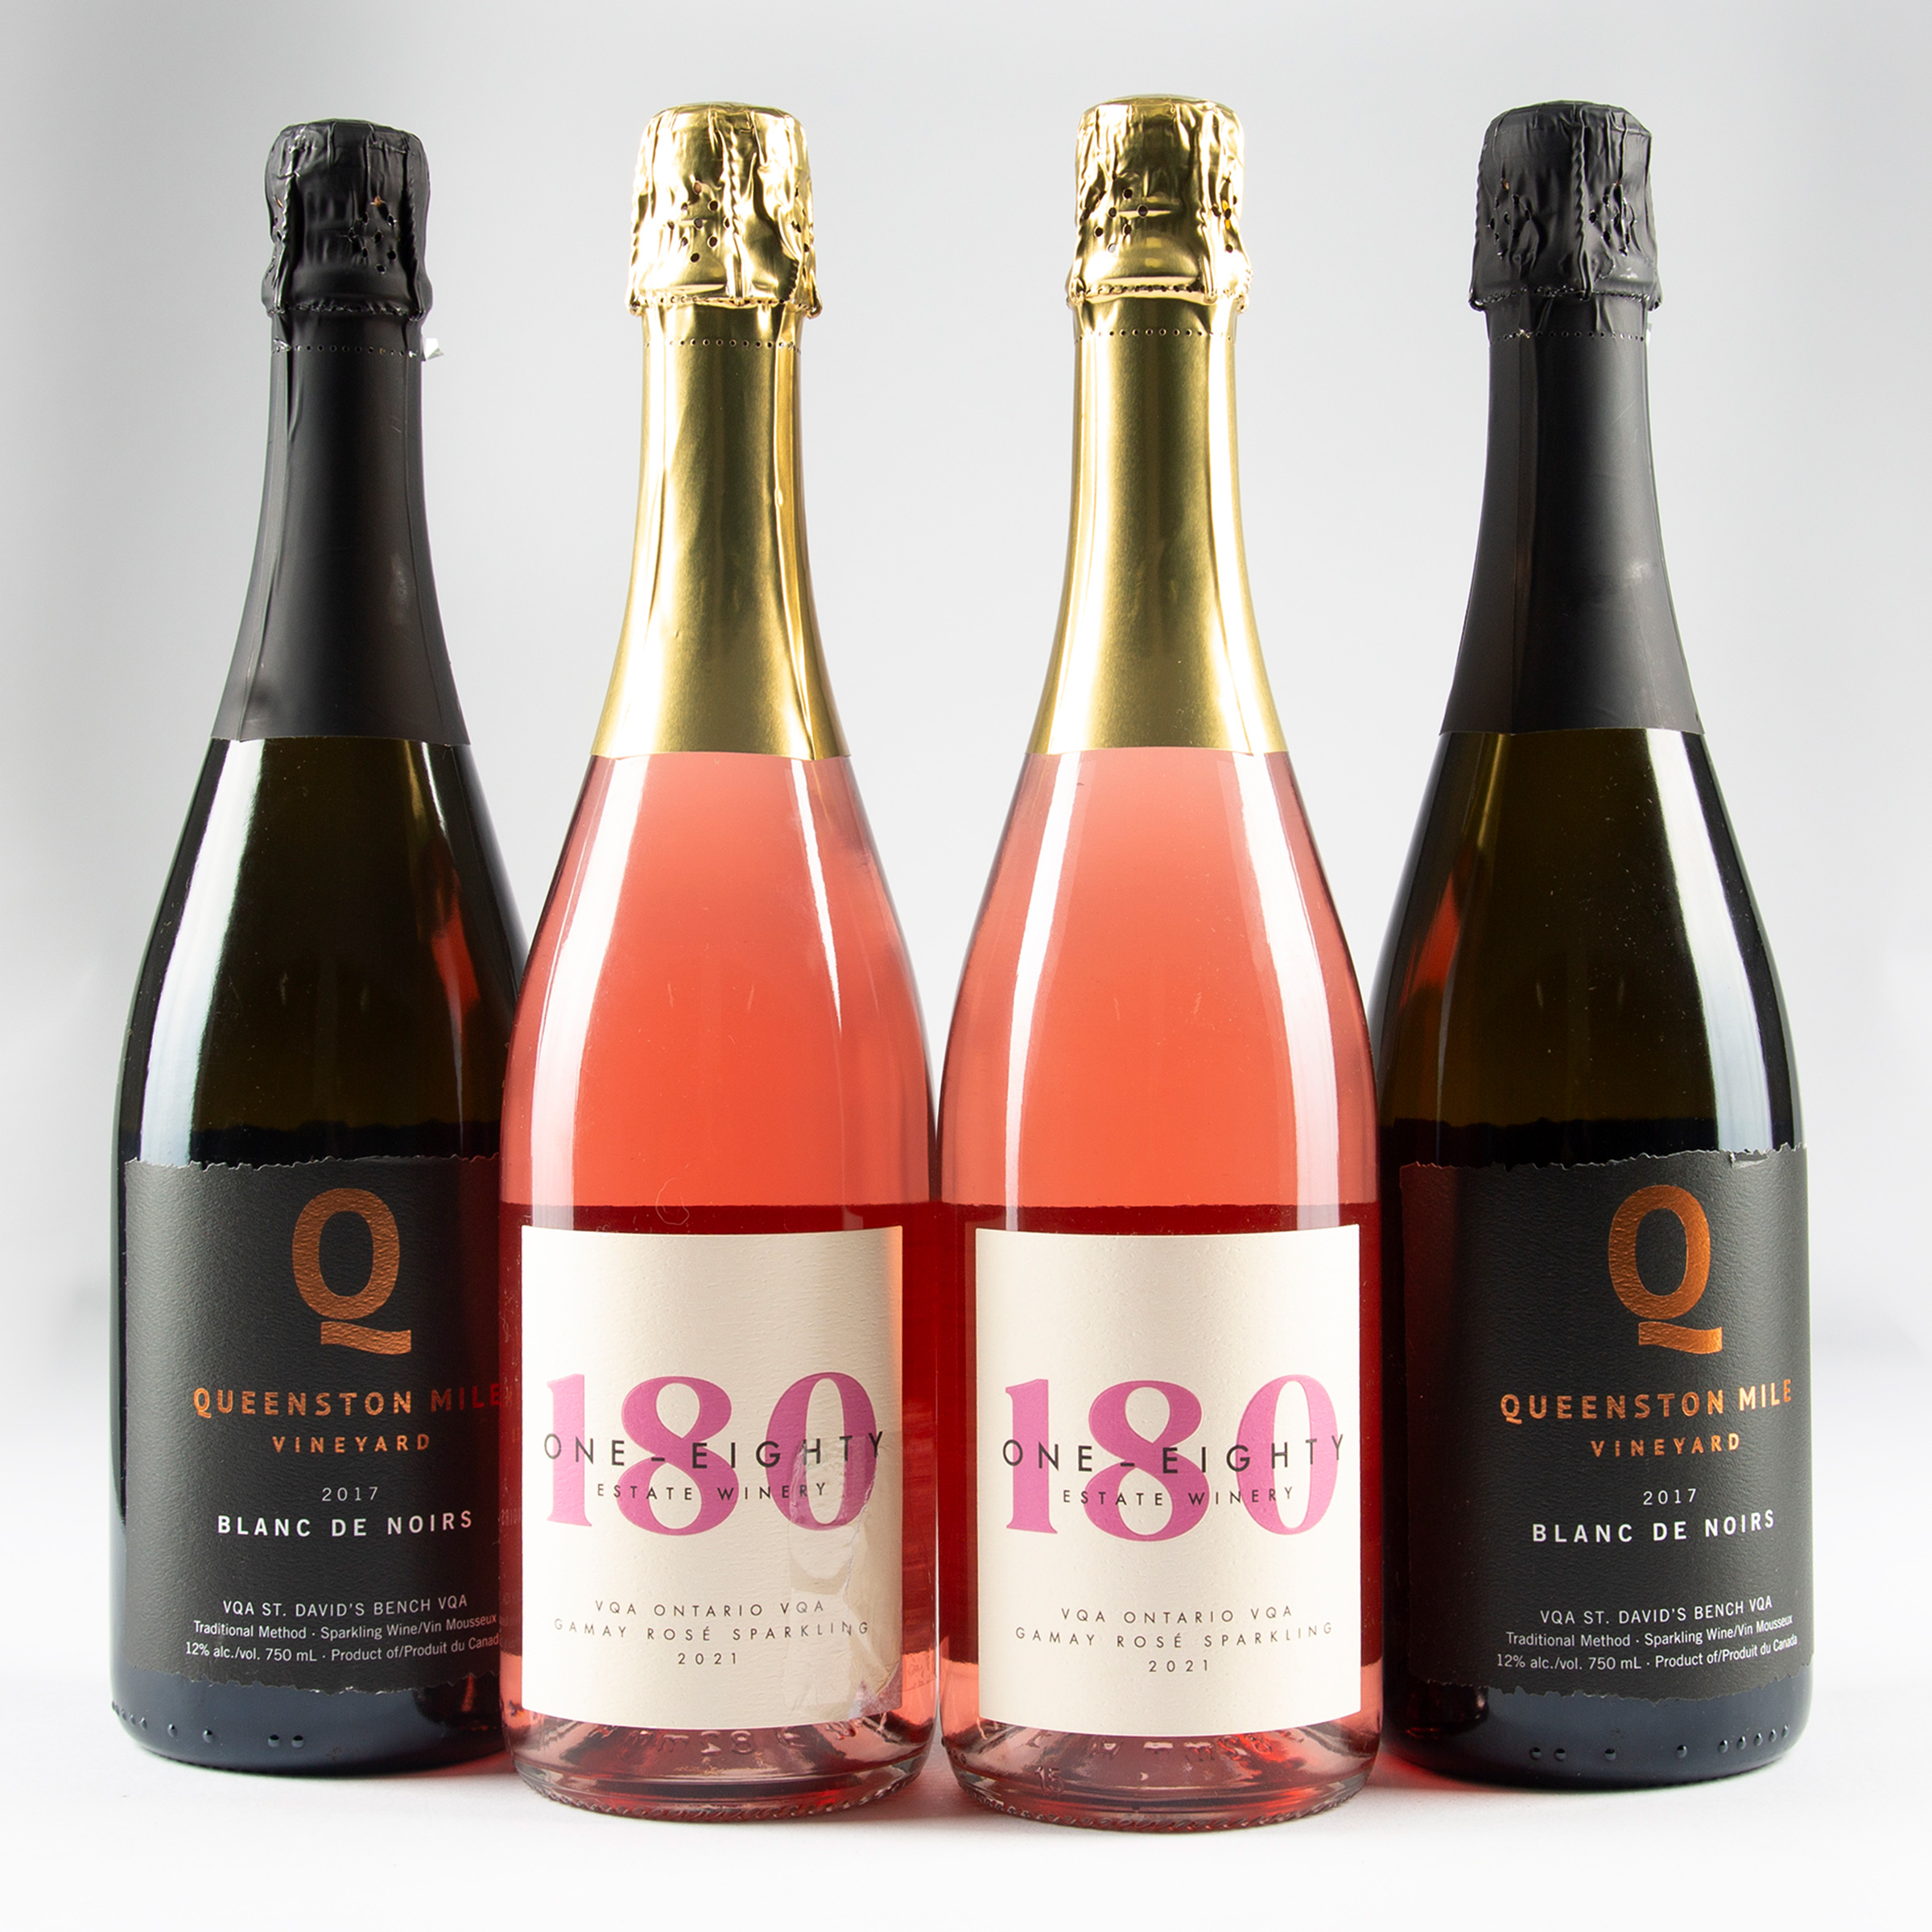 ONE-EIGHTY ESTATE GAMAY ROSÉ SPARKLING 2021 (1)
ONE-EIGHTY ESTATE GAMAY ROSÉ SPARKLING 2021 (1)
QUEENSTON MILE VINEYARD PINOT NOIR BLANC DE NOIRS 2017 (1)
QUEENSTON MILE VINEYARD PINOT NOIR BLANC DE NOIRS 2017 (1)